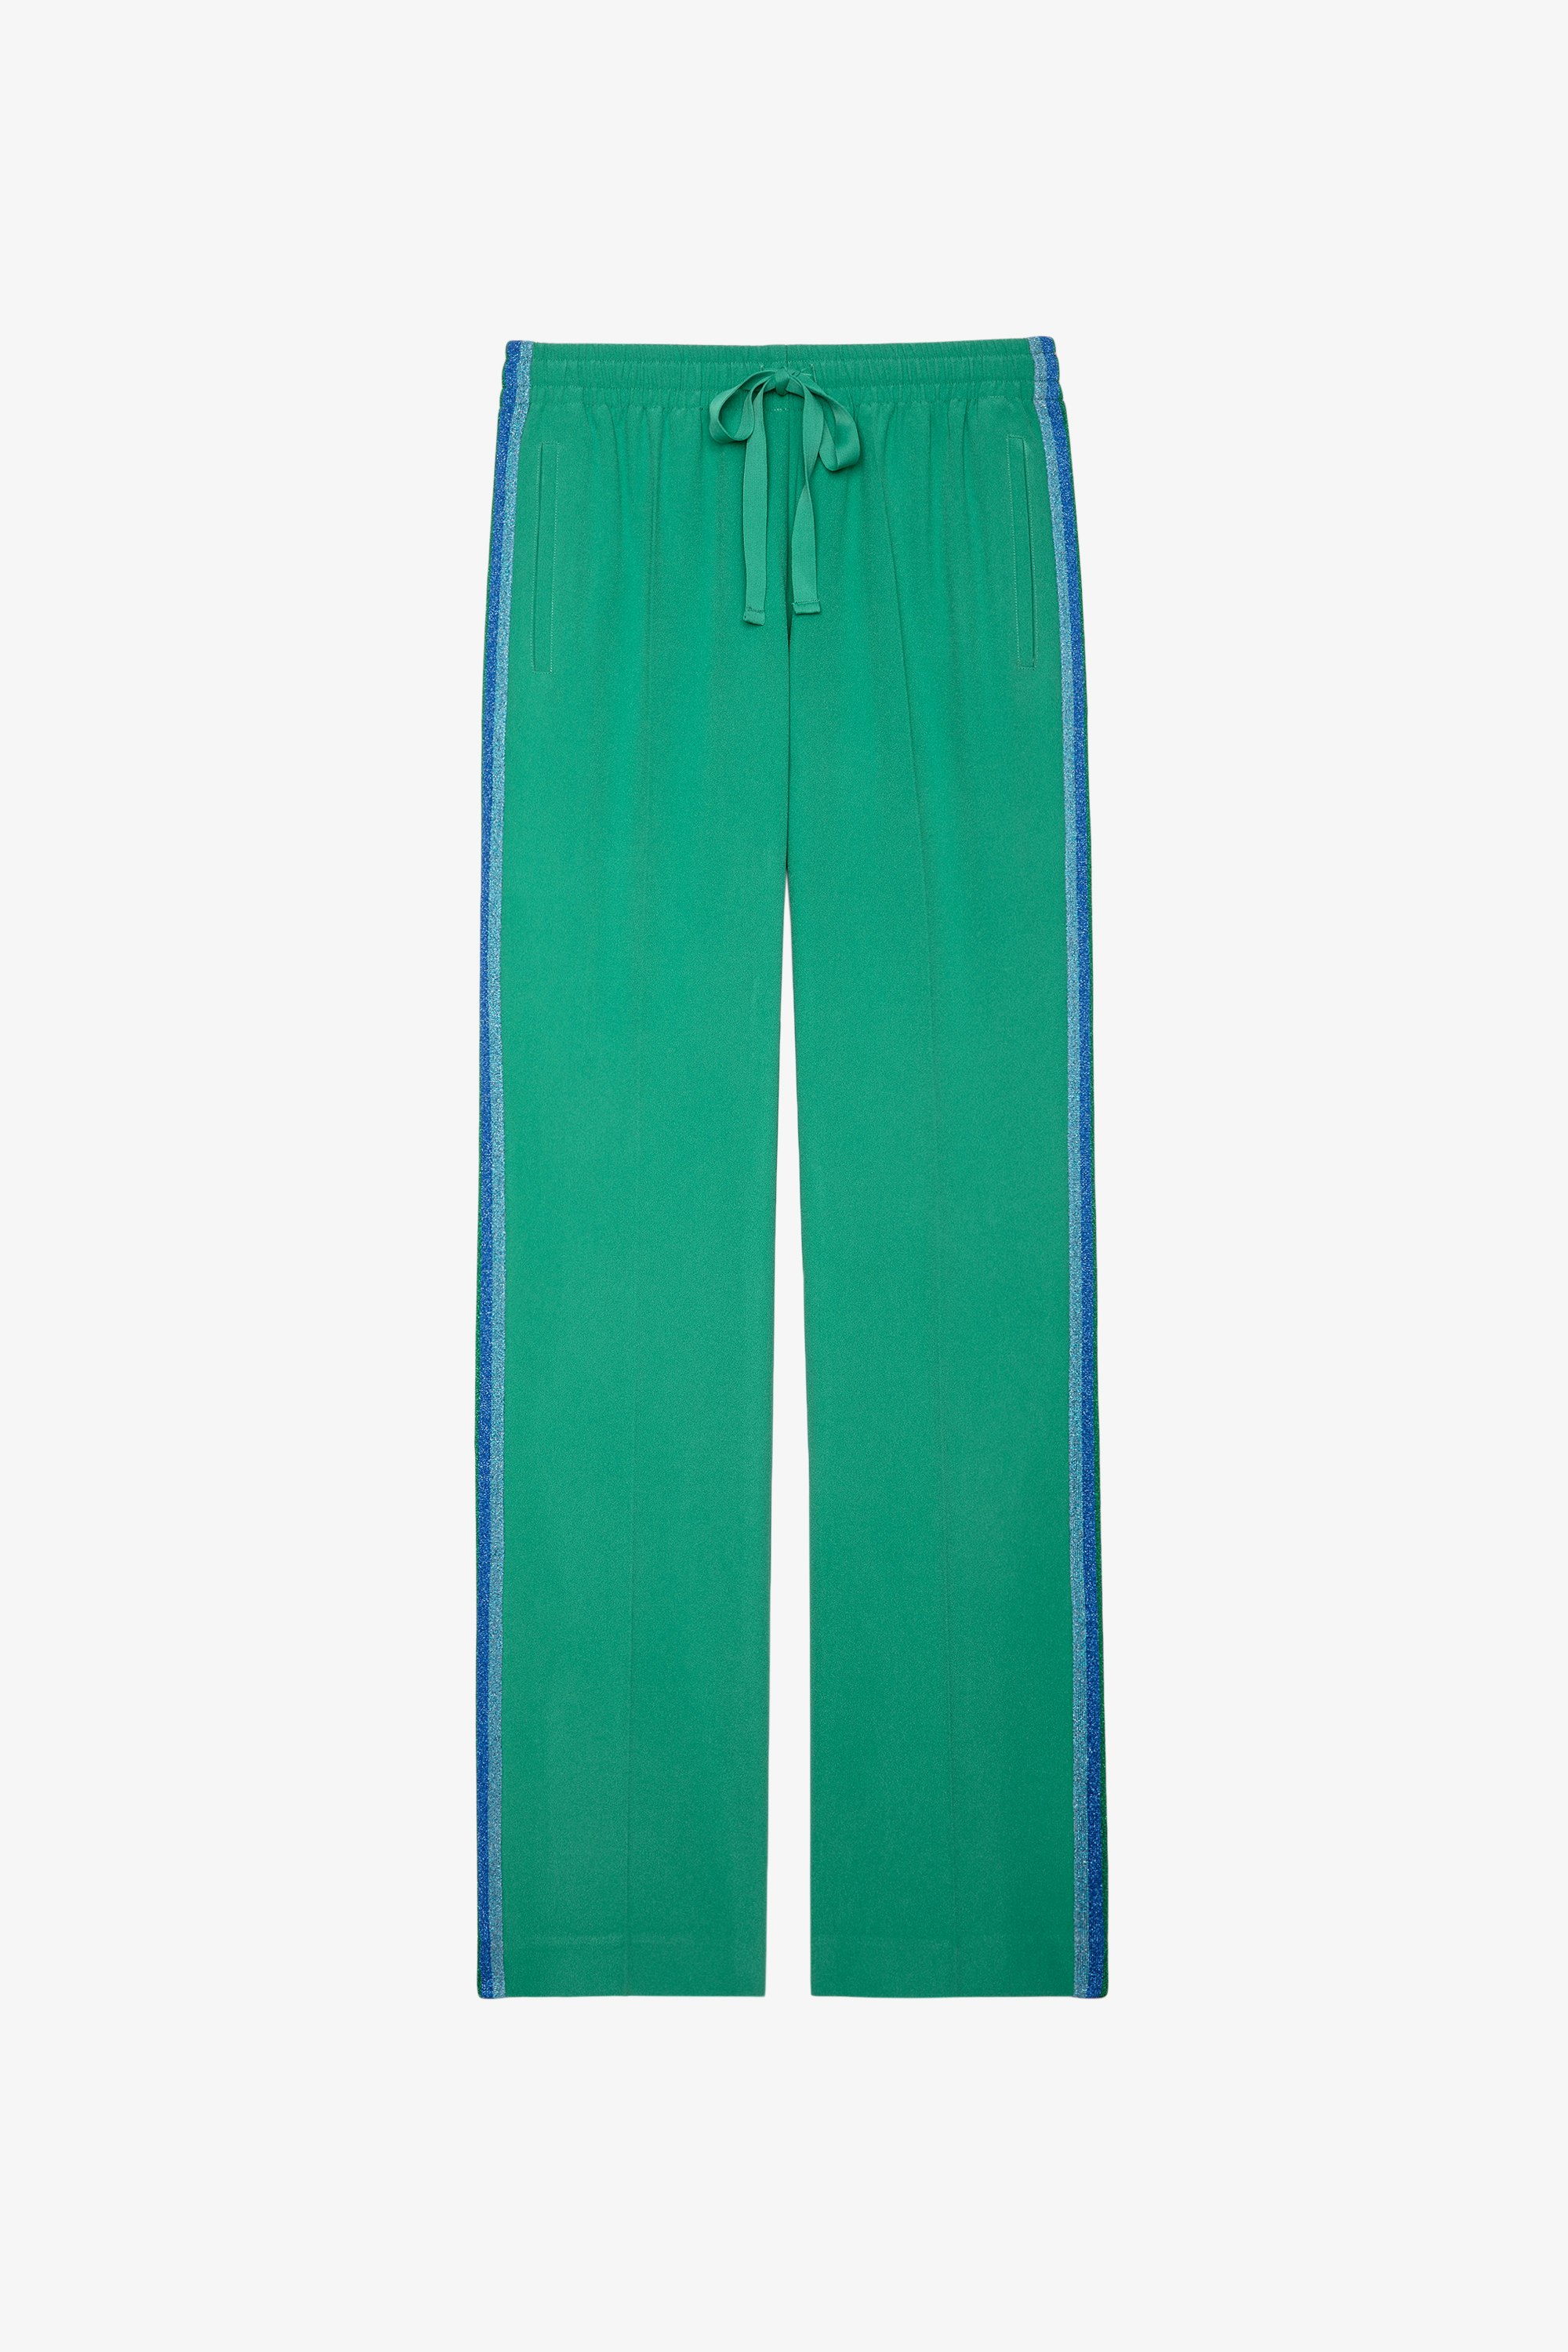 Pomy Crepe パンツ Women's flowing trousers in green with glittering side stripes